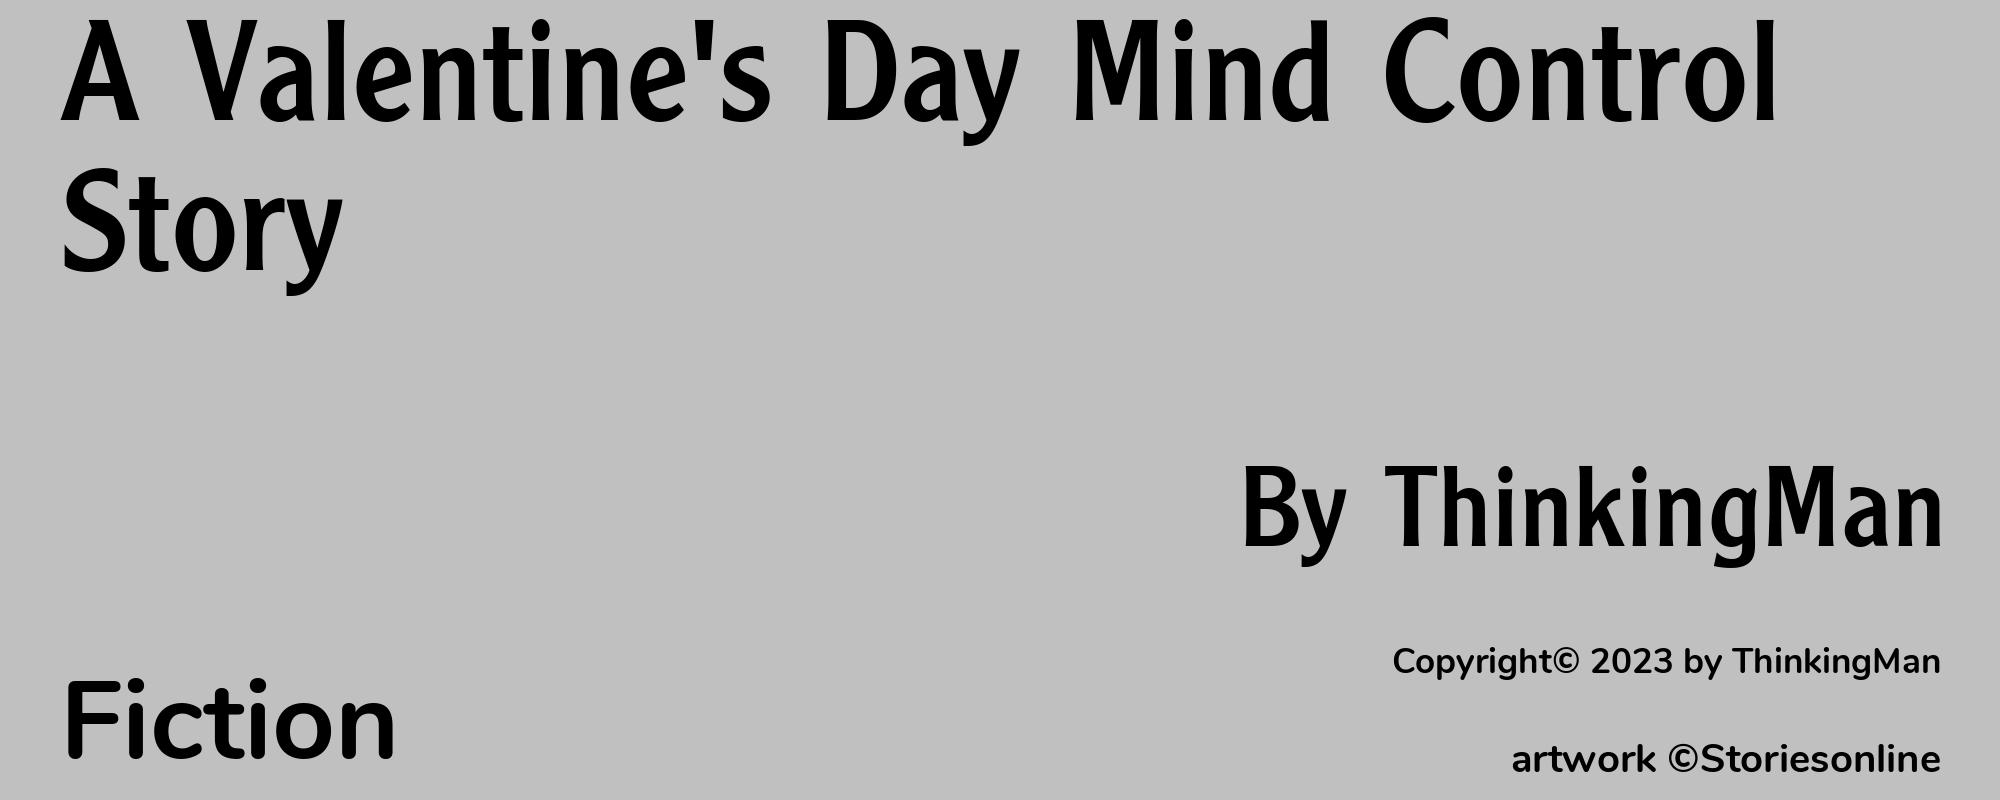 A Valentine's Day Mind Control Story - Cover